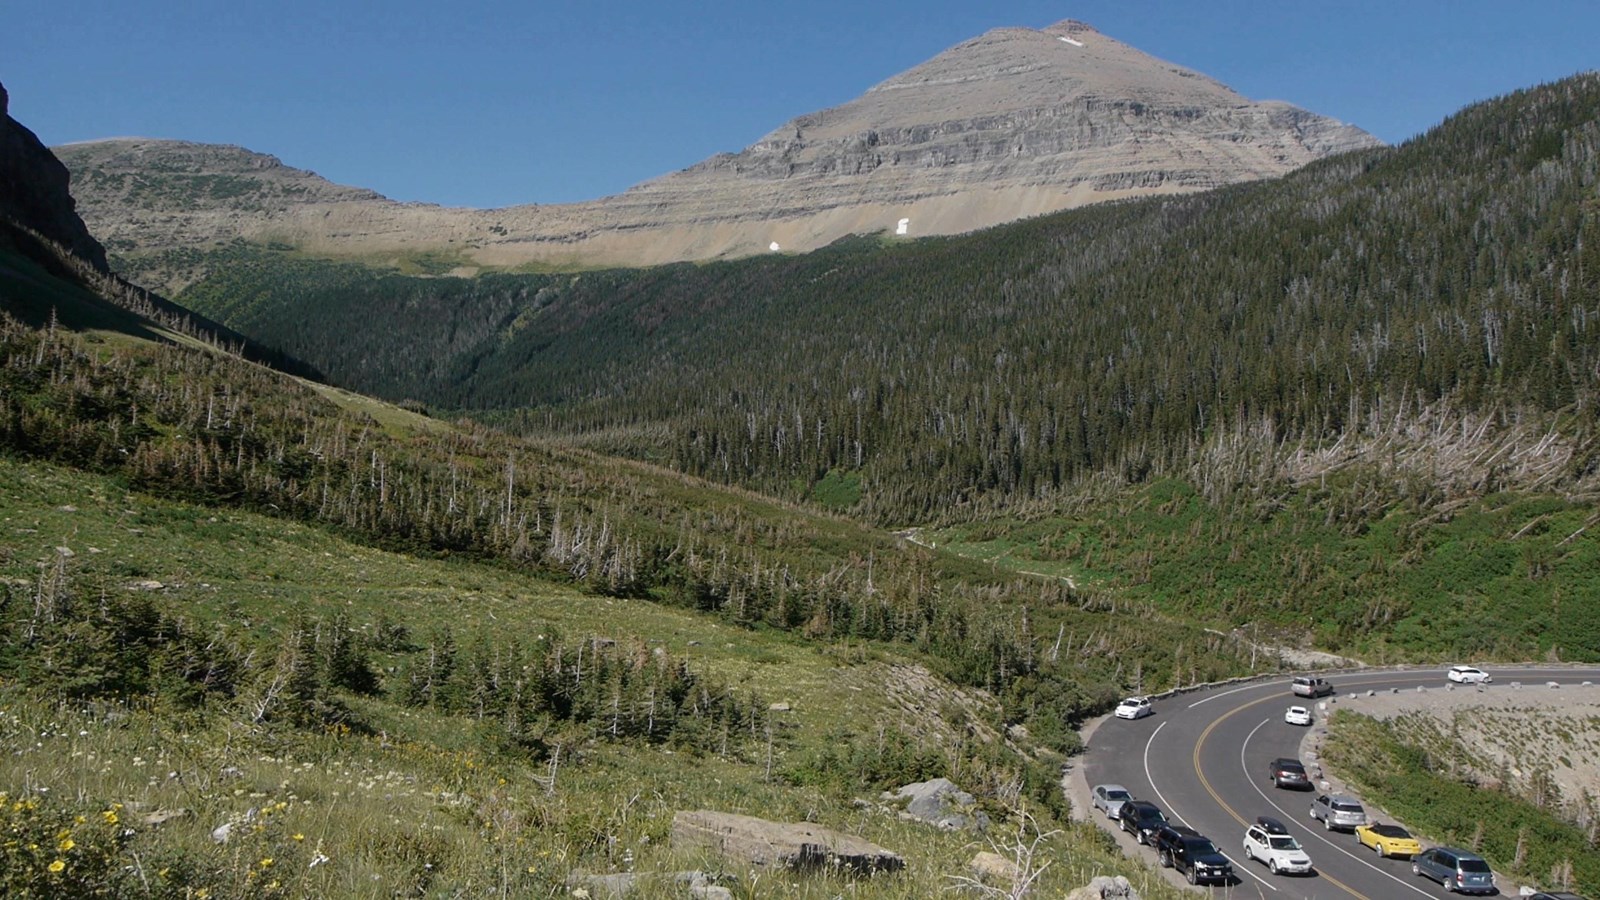 Cars parked along a bend in the road, with a mountain in the distance.